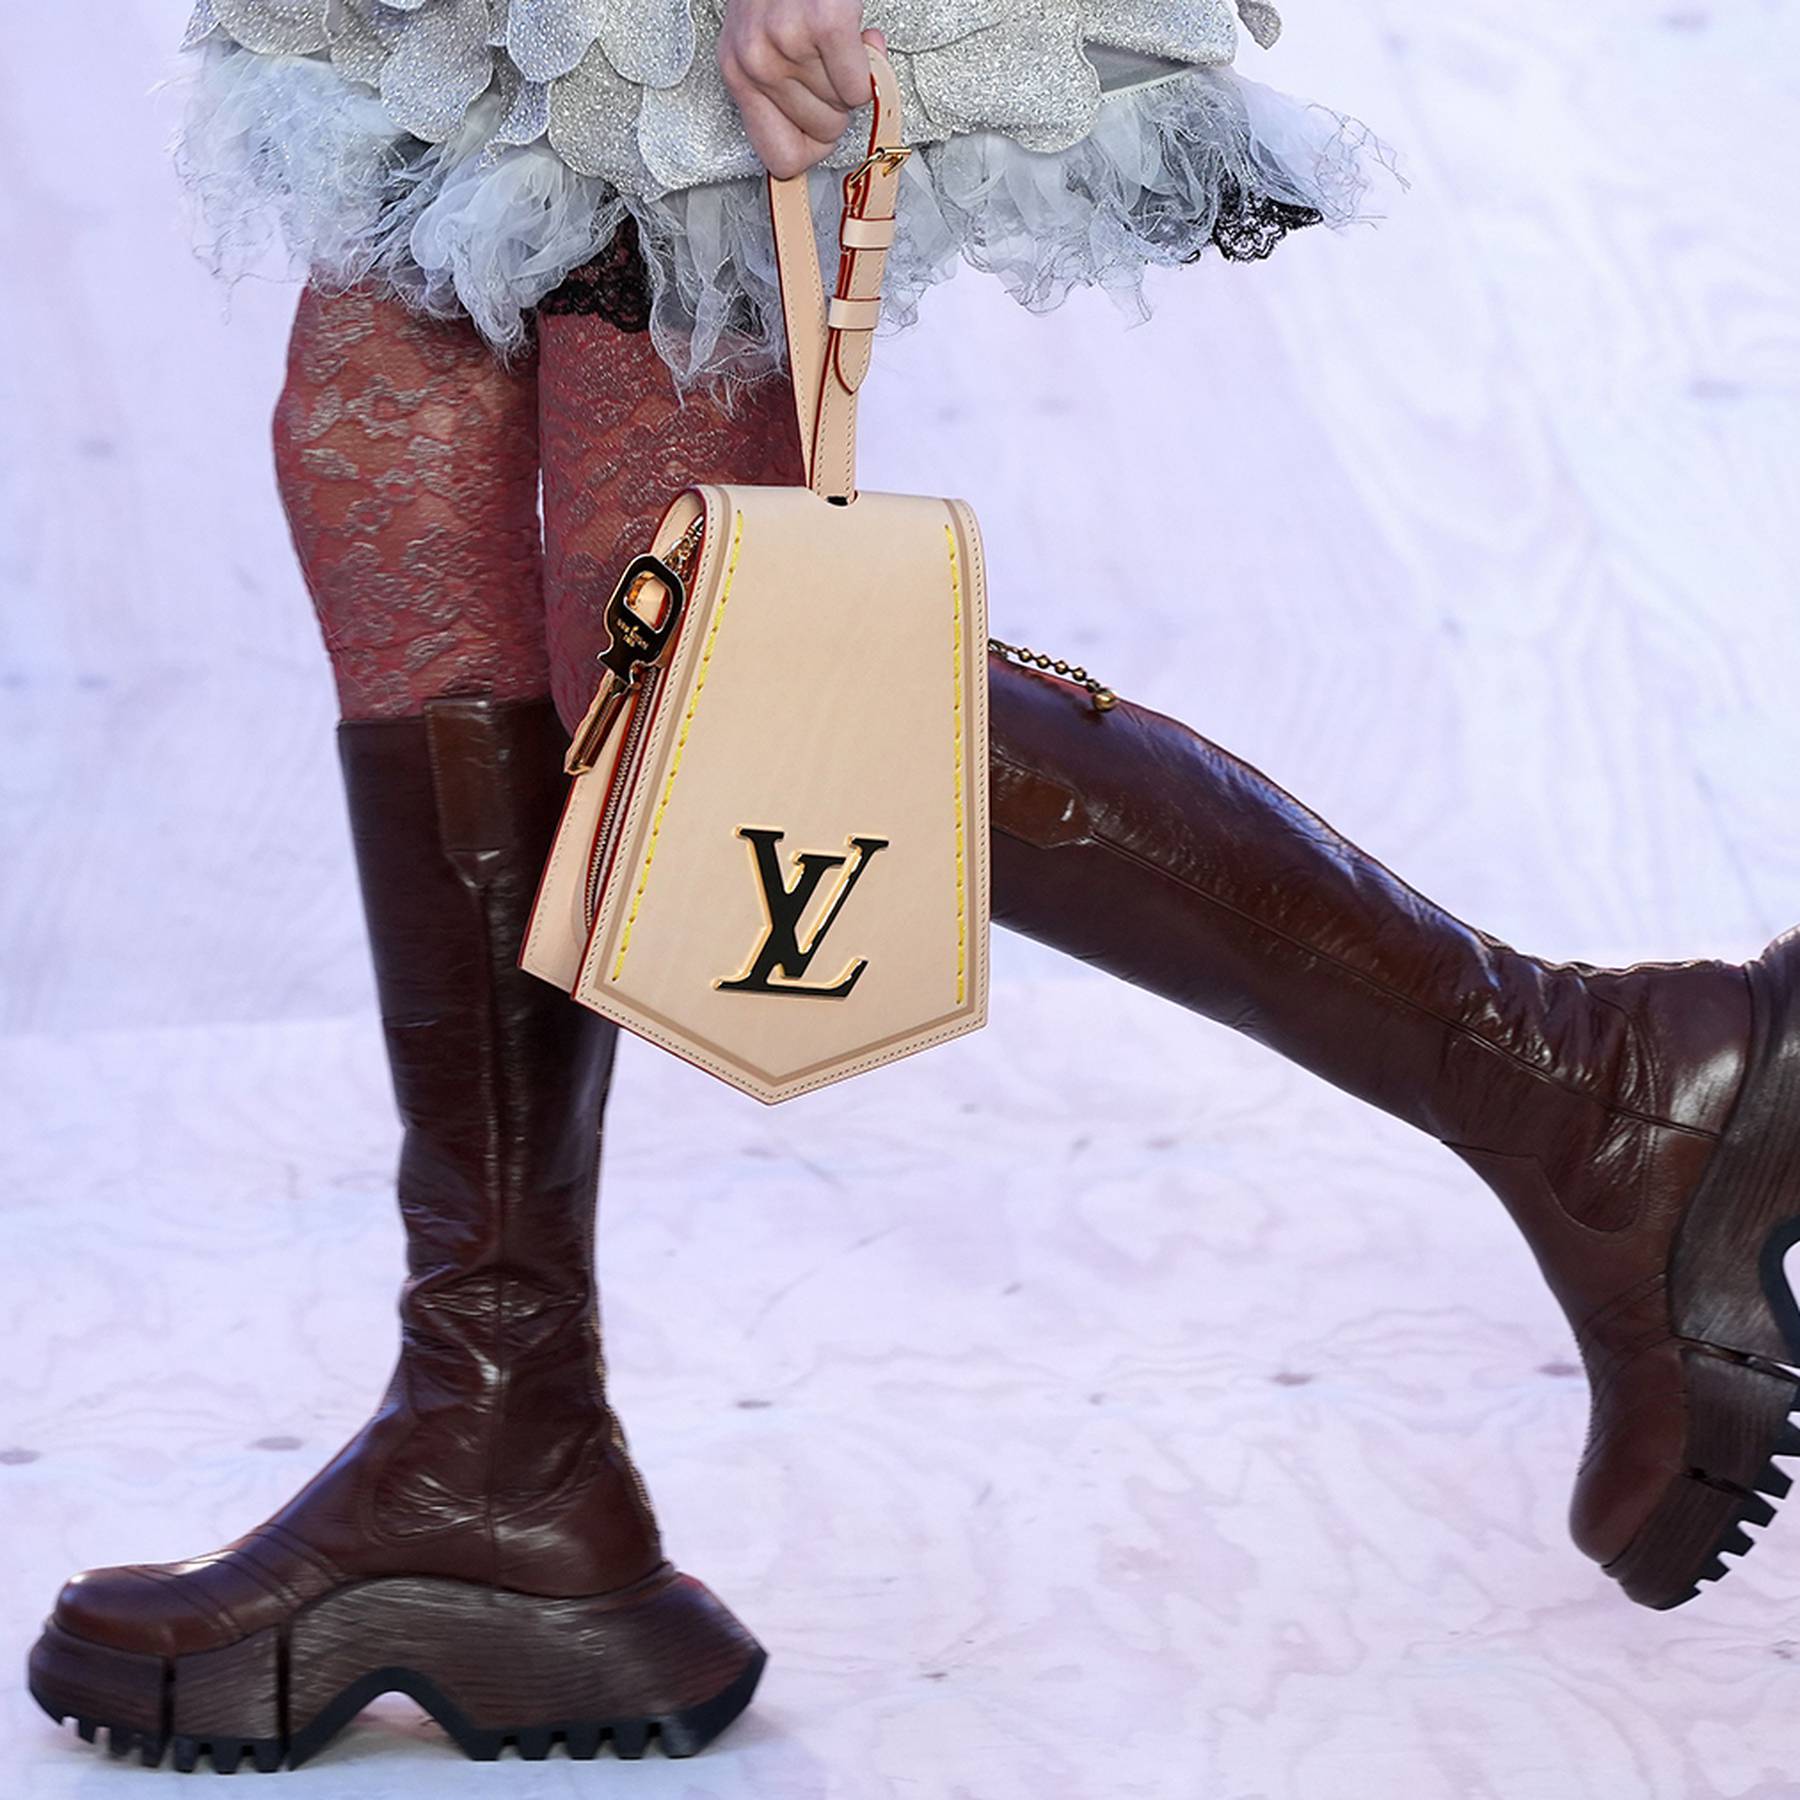 LVMH to Build New Workshop Making Louis Vuitton Bags in Italy